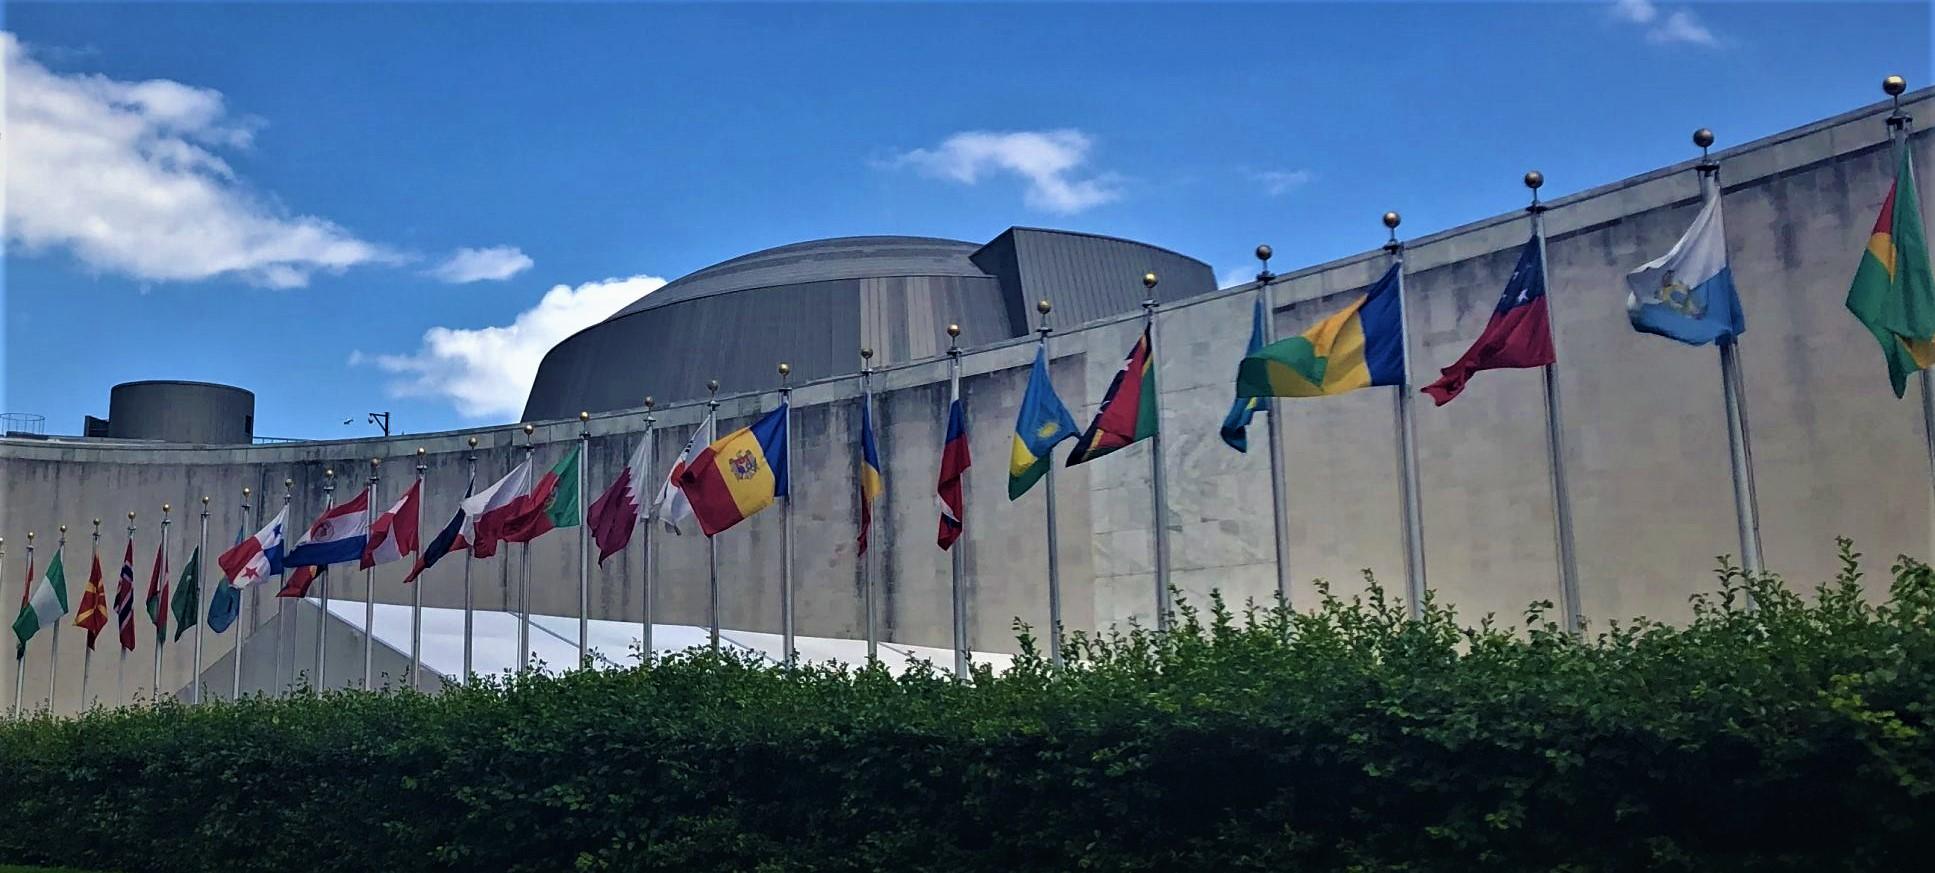 The flags outside the UN buildings